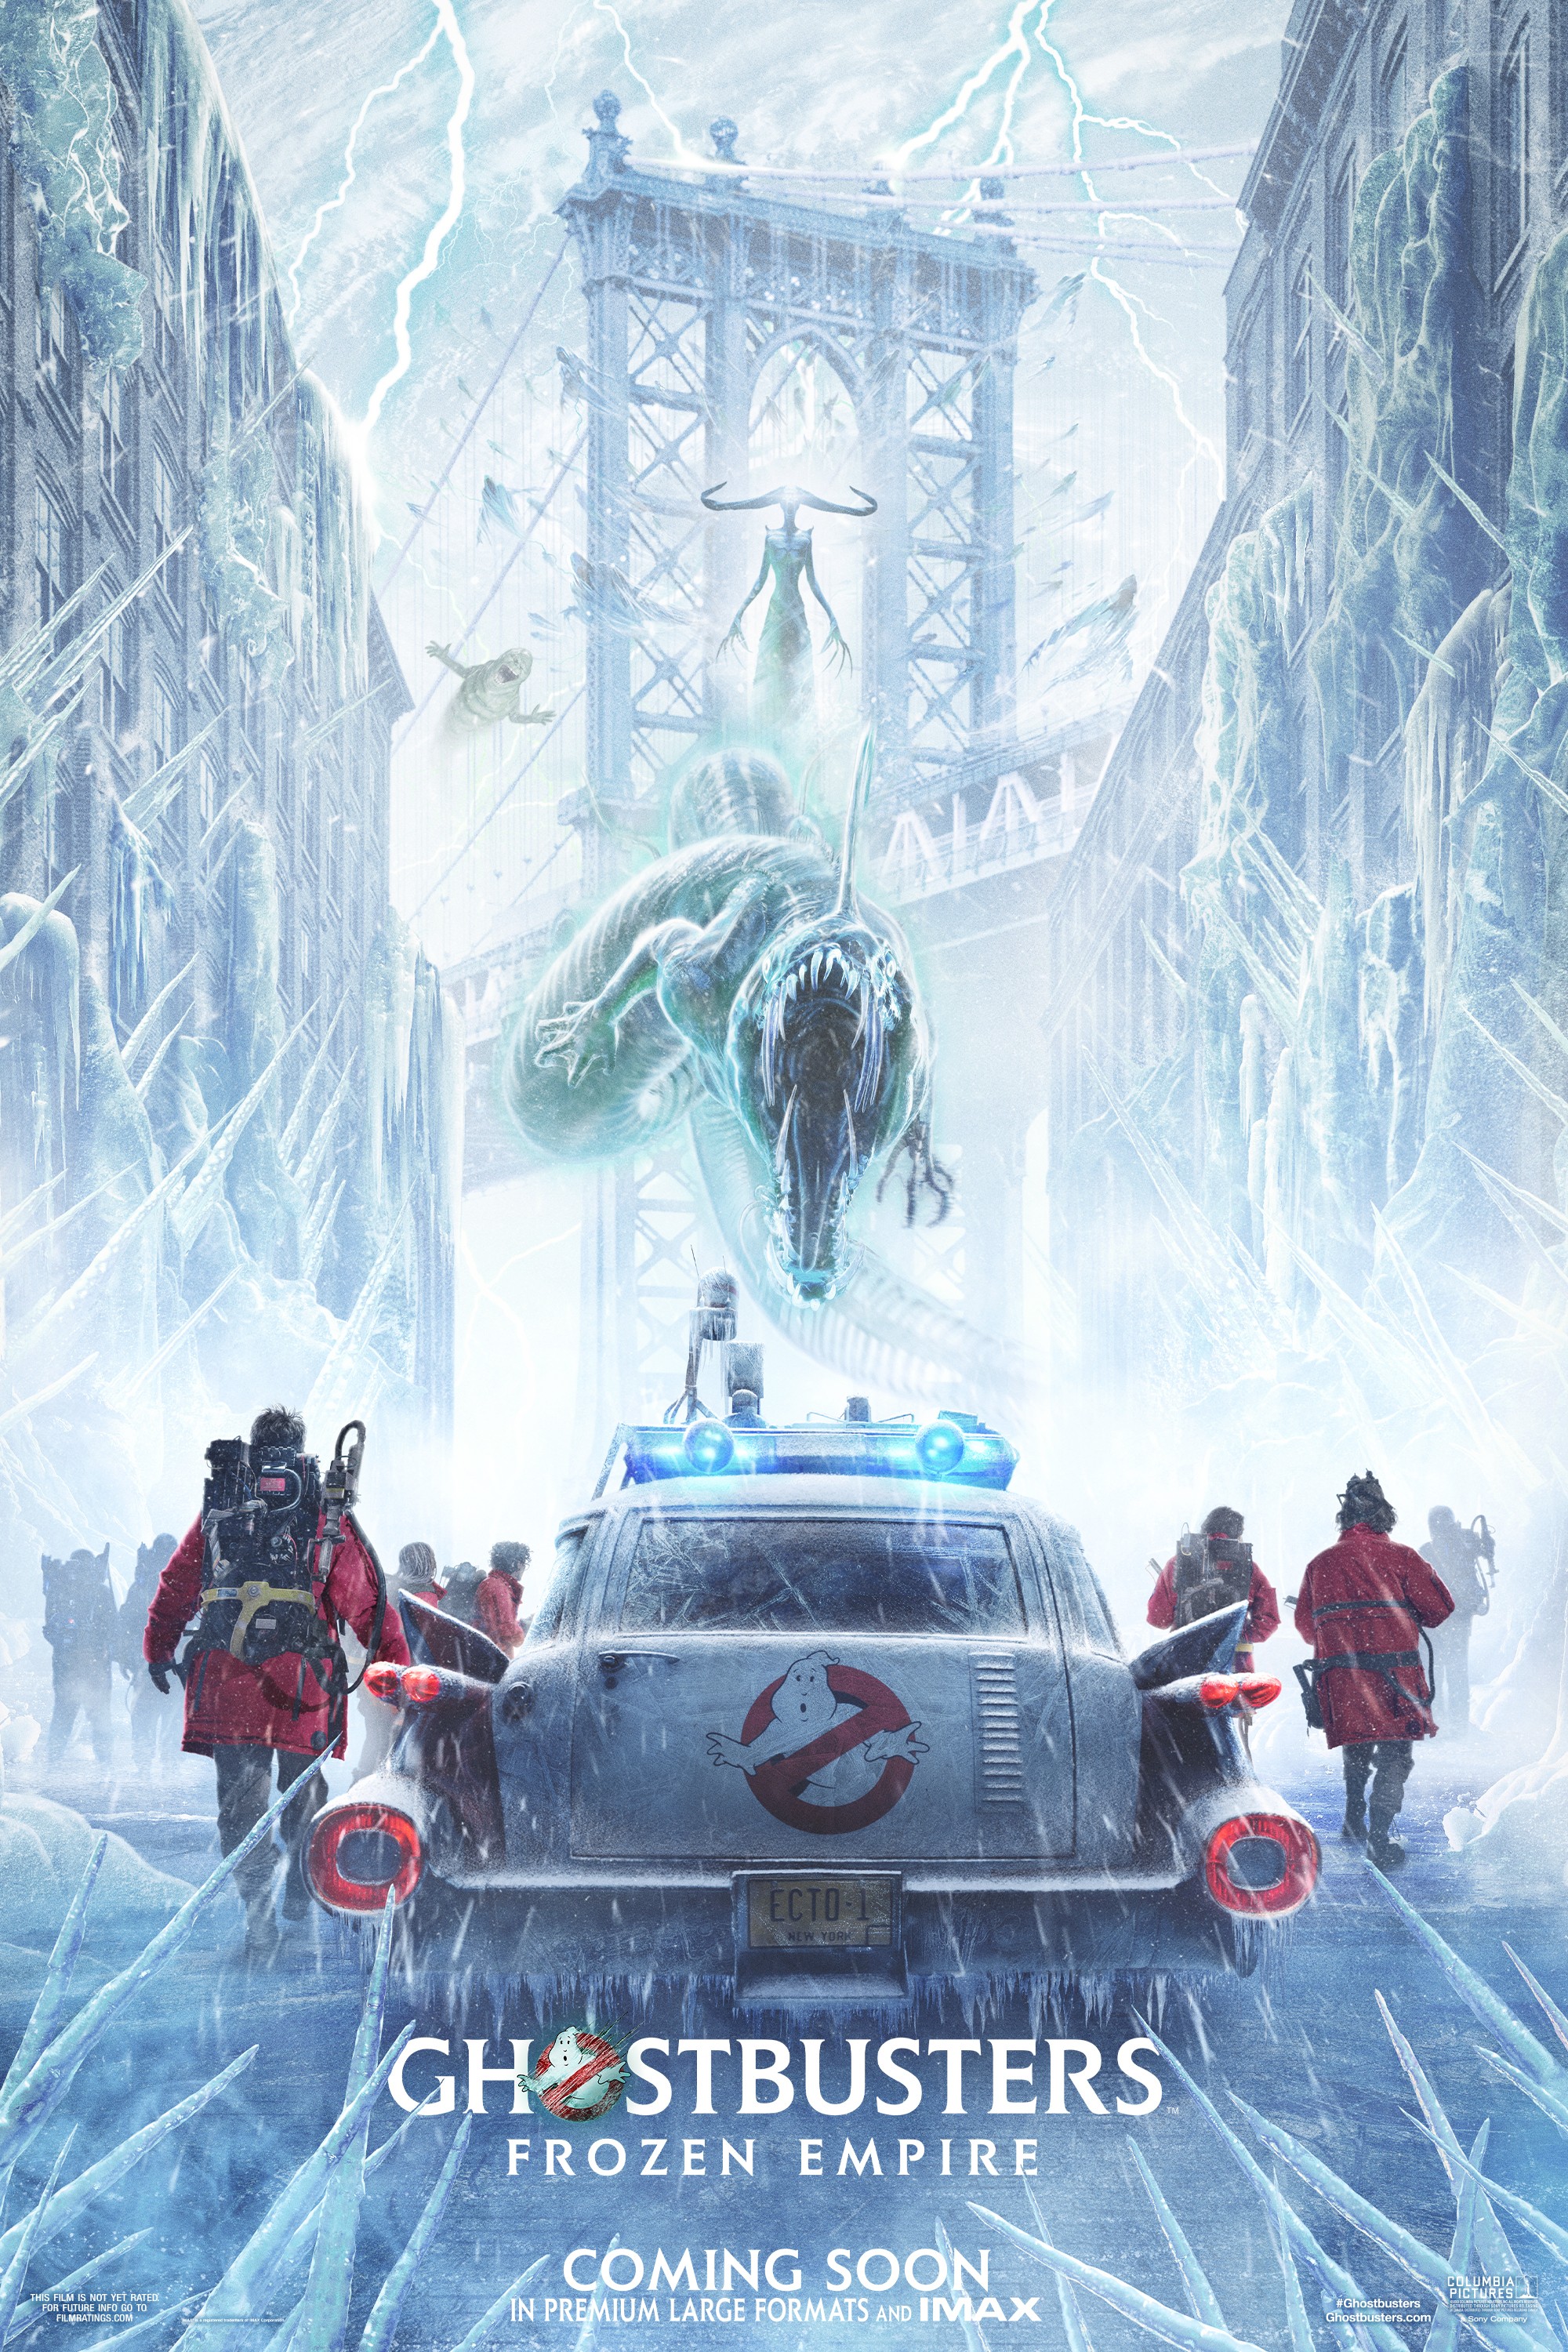 Ghostbusters Frozen Empire Rotten Tomatoes